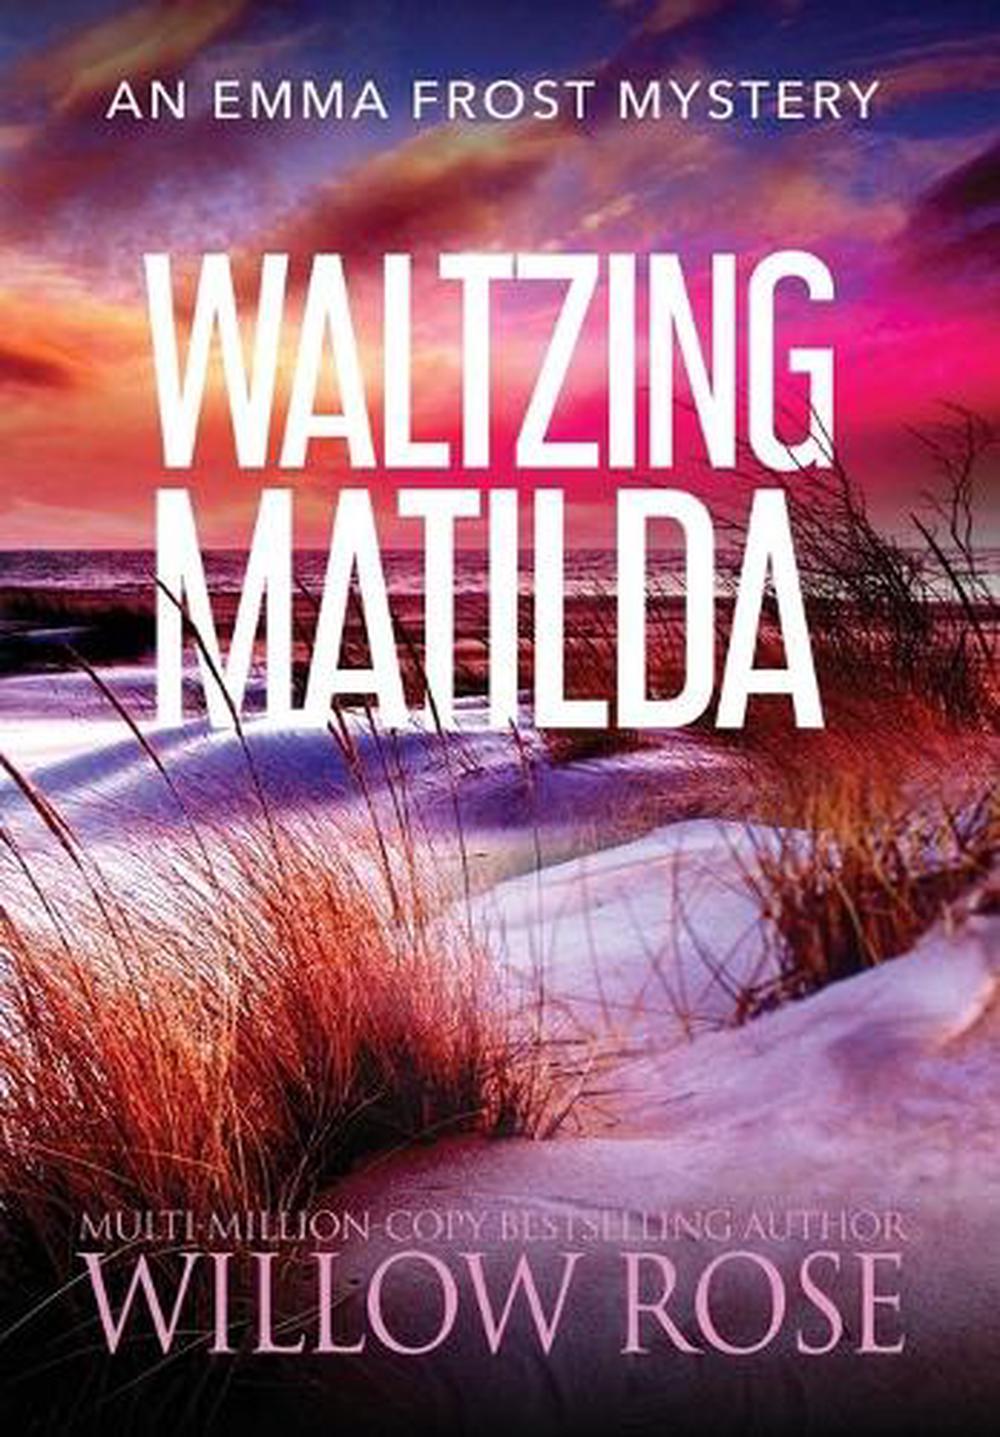 Waltzing Matilda by Willow Rose (English) Hardcover Book Free Shipping ...